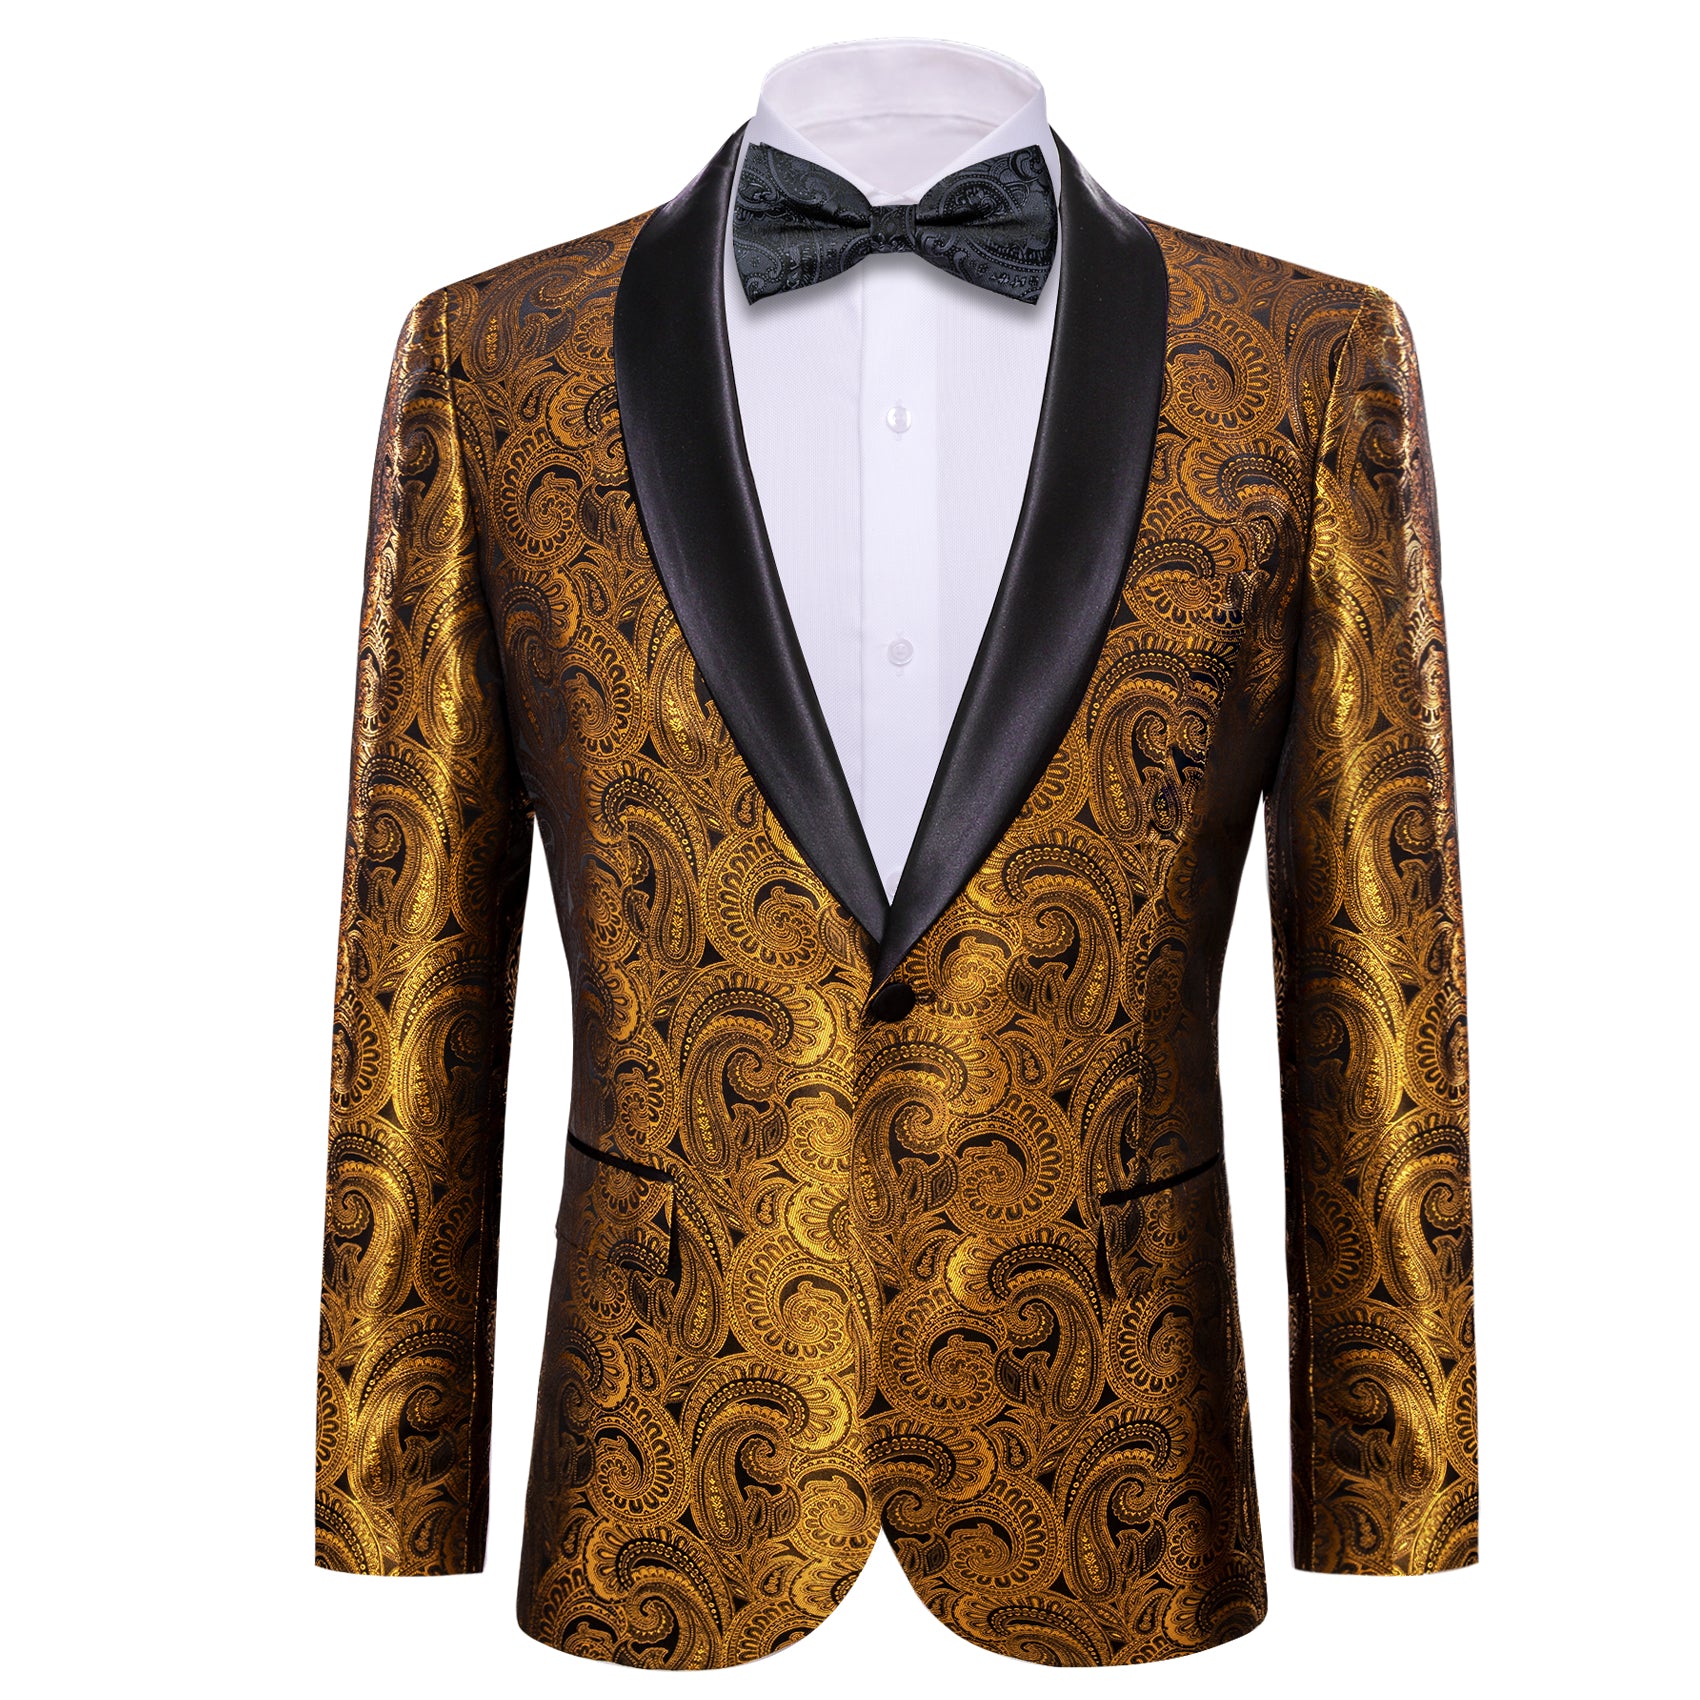 Barry Wang Men's Blazer Brown Gold Floral One Button Stylish Suit